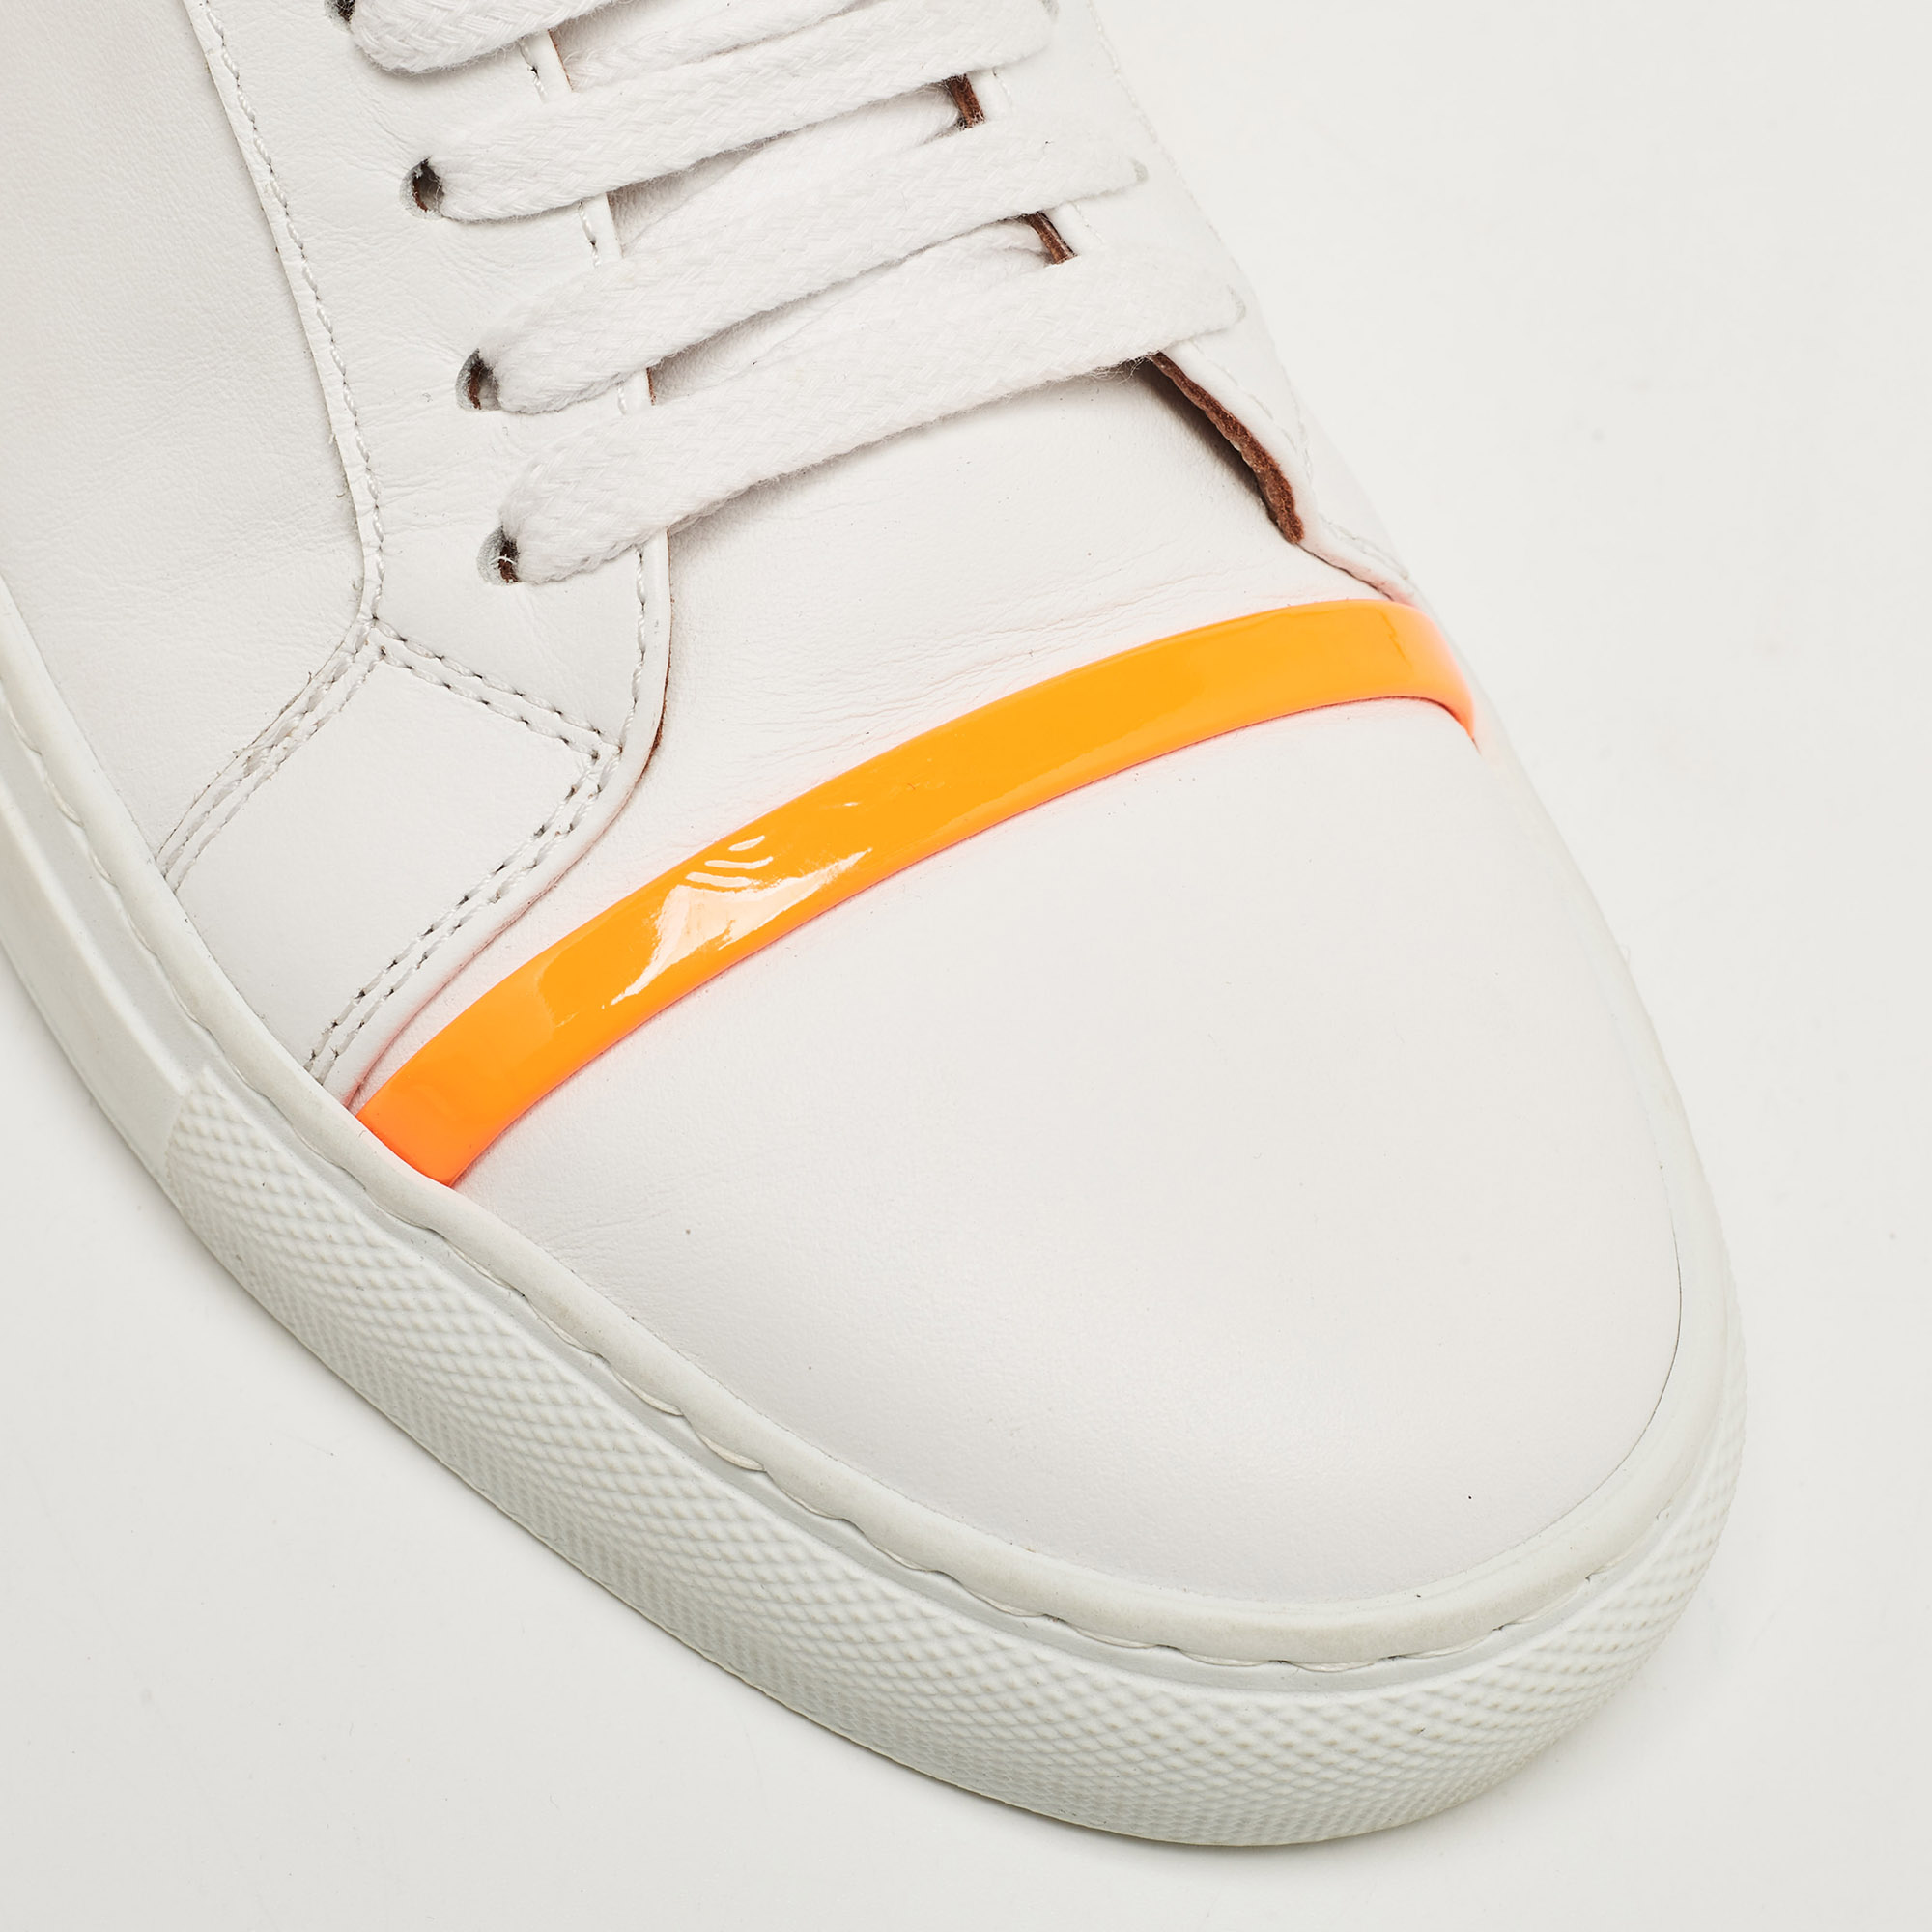 Malone Souliers White/Neon Orange Leather And Patent Deon Sneakers Size 37